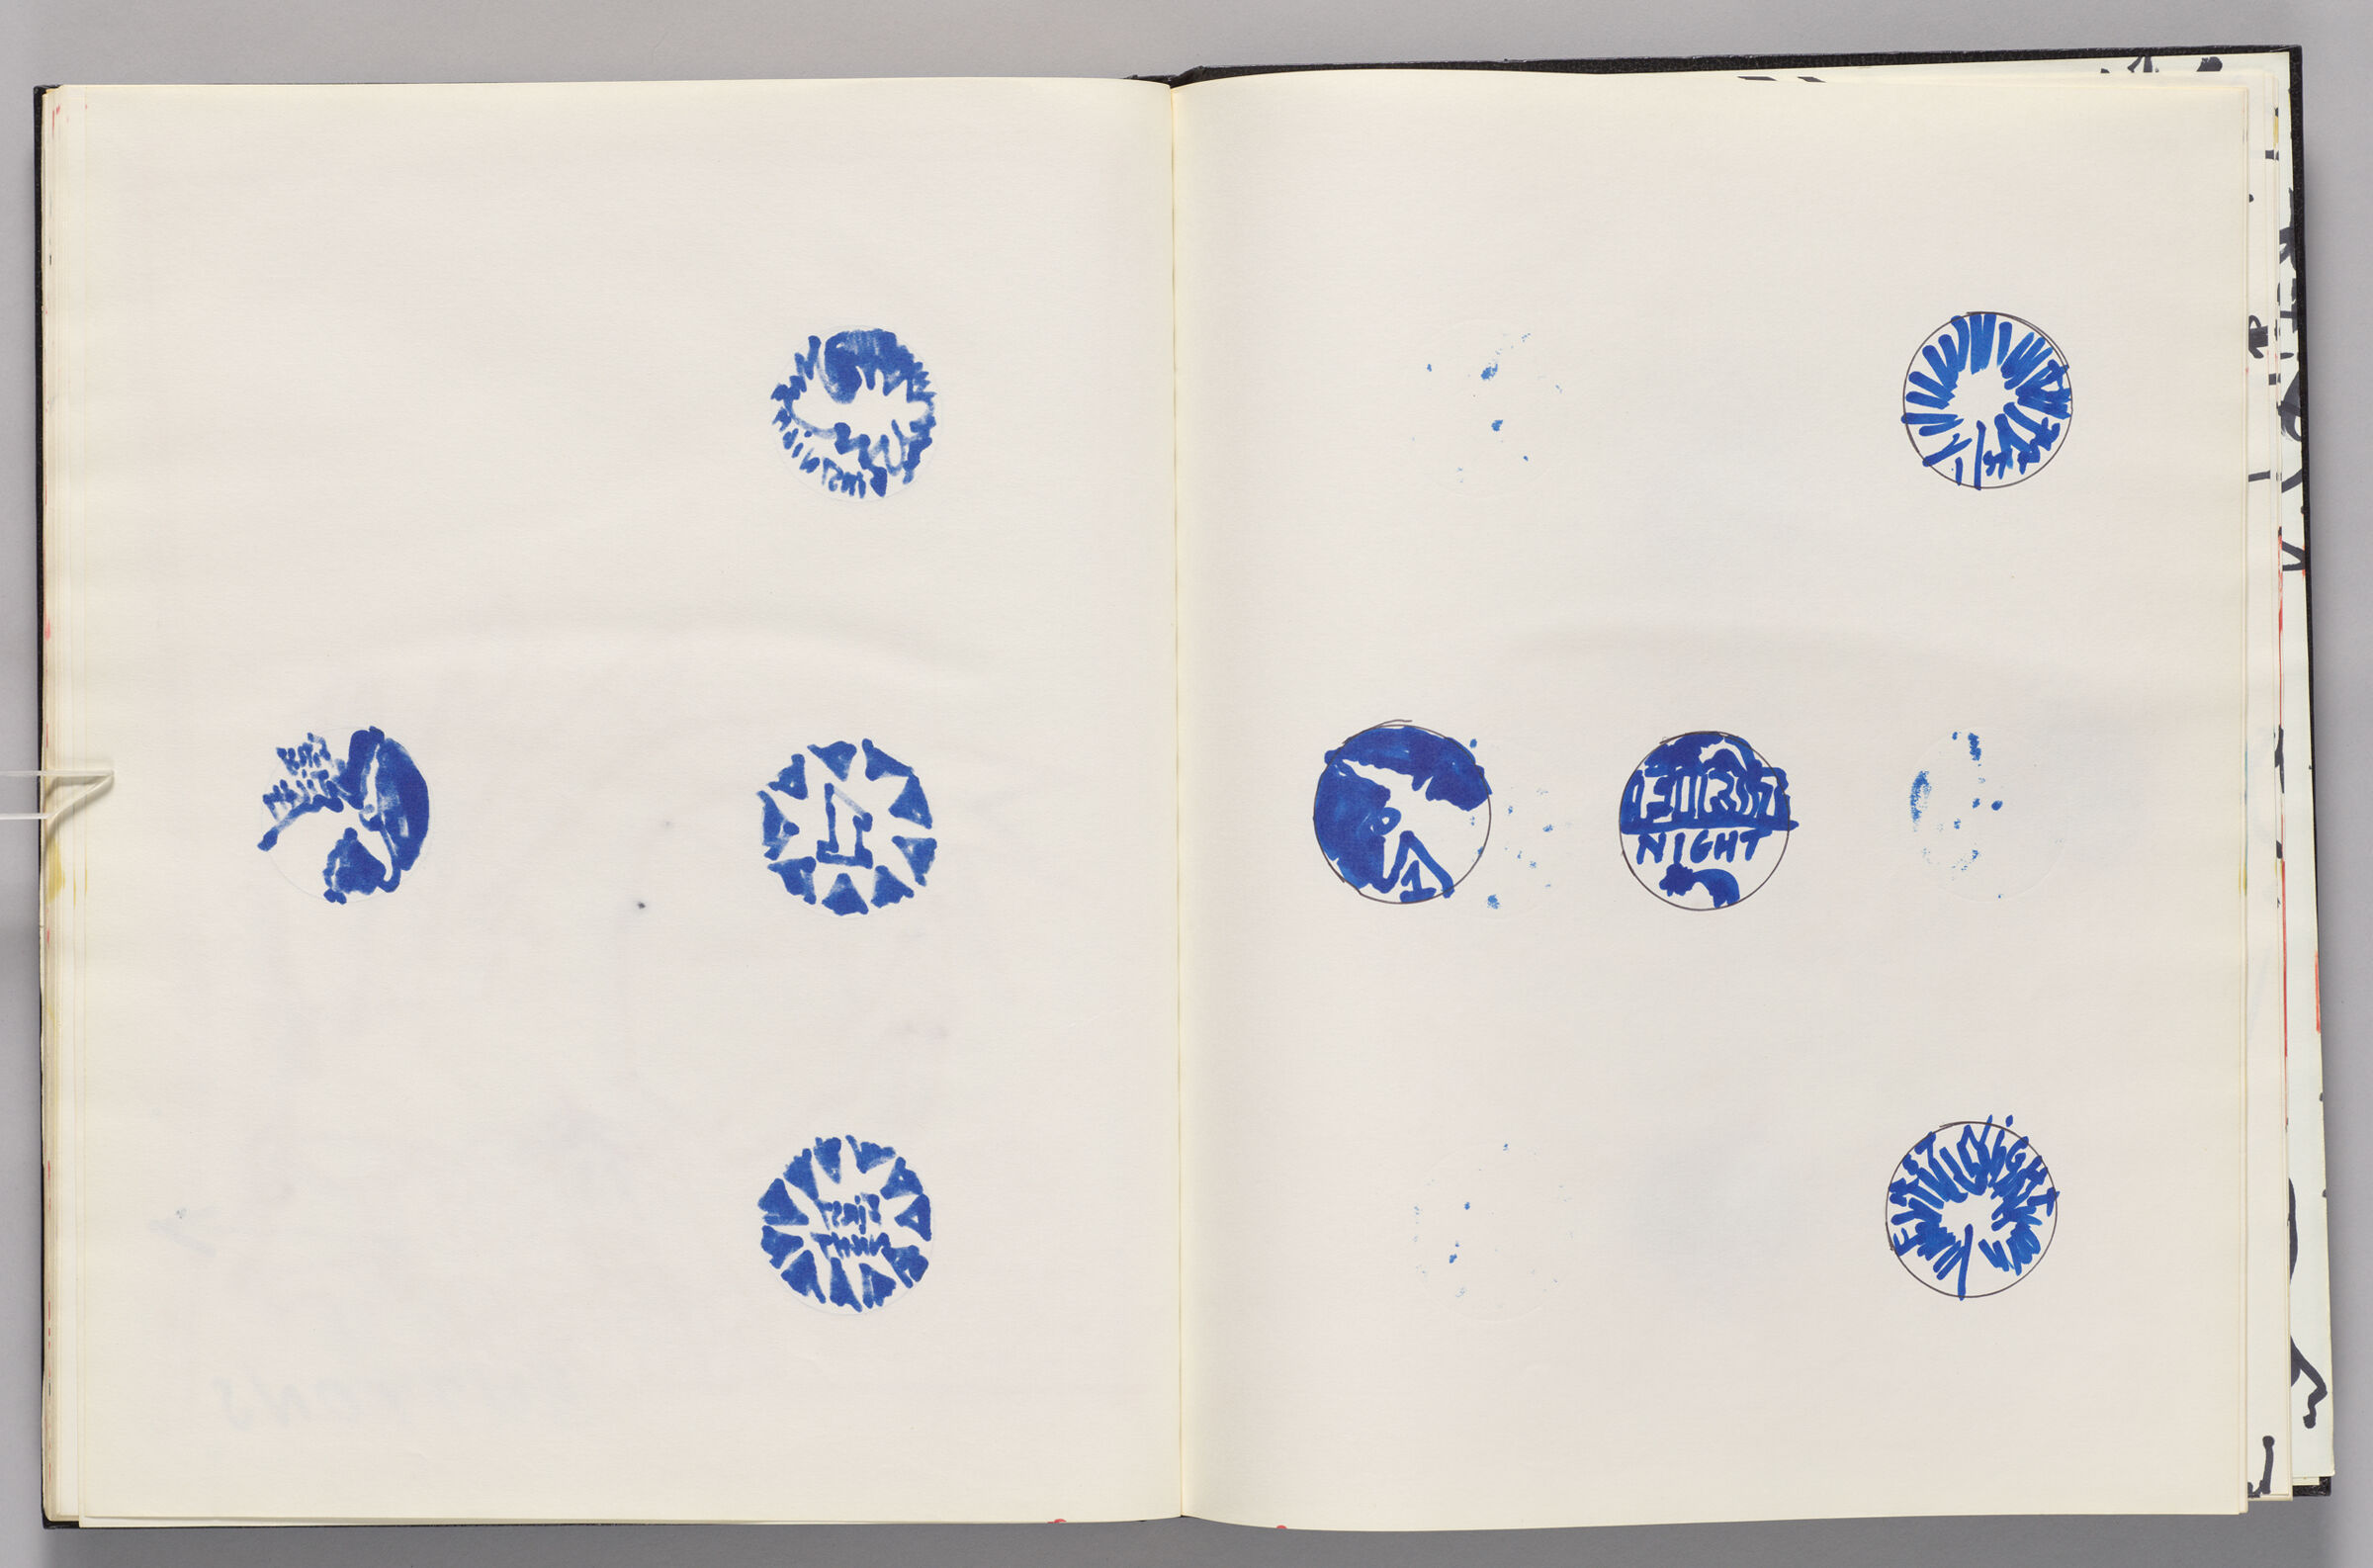 Untitled (Bleed-Through Of Previous Page, Left Page); Untitled (Four Designs For First Night Buttons, Right Page)